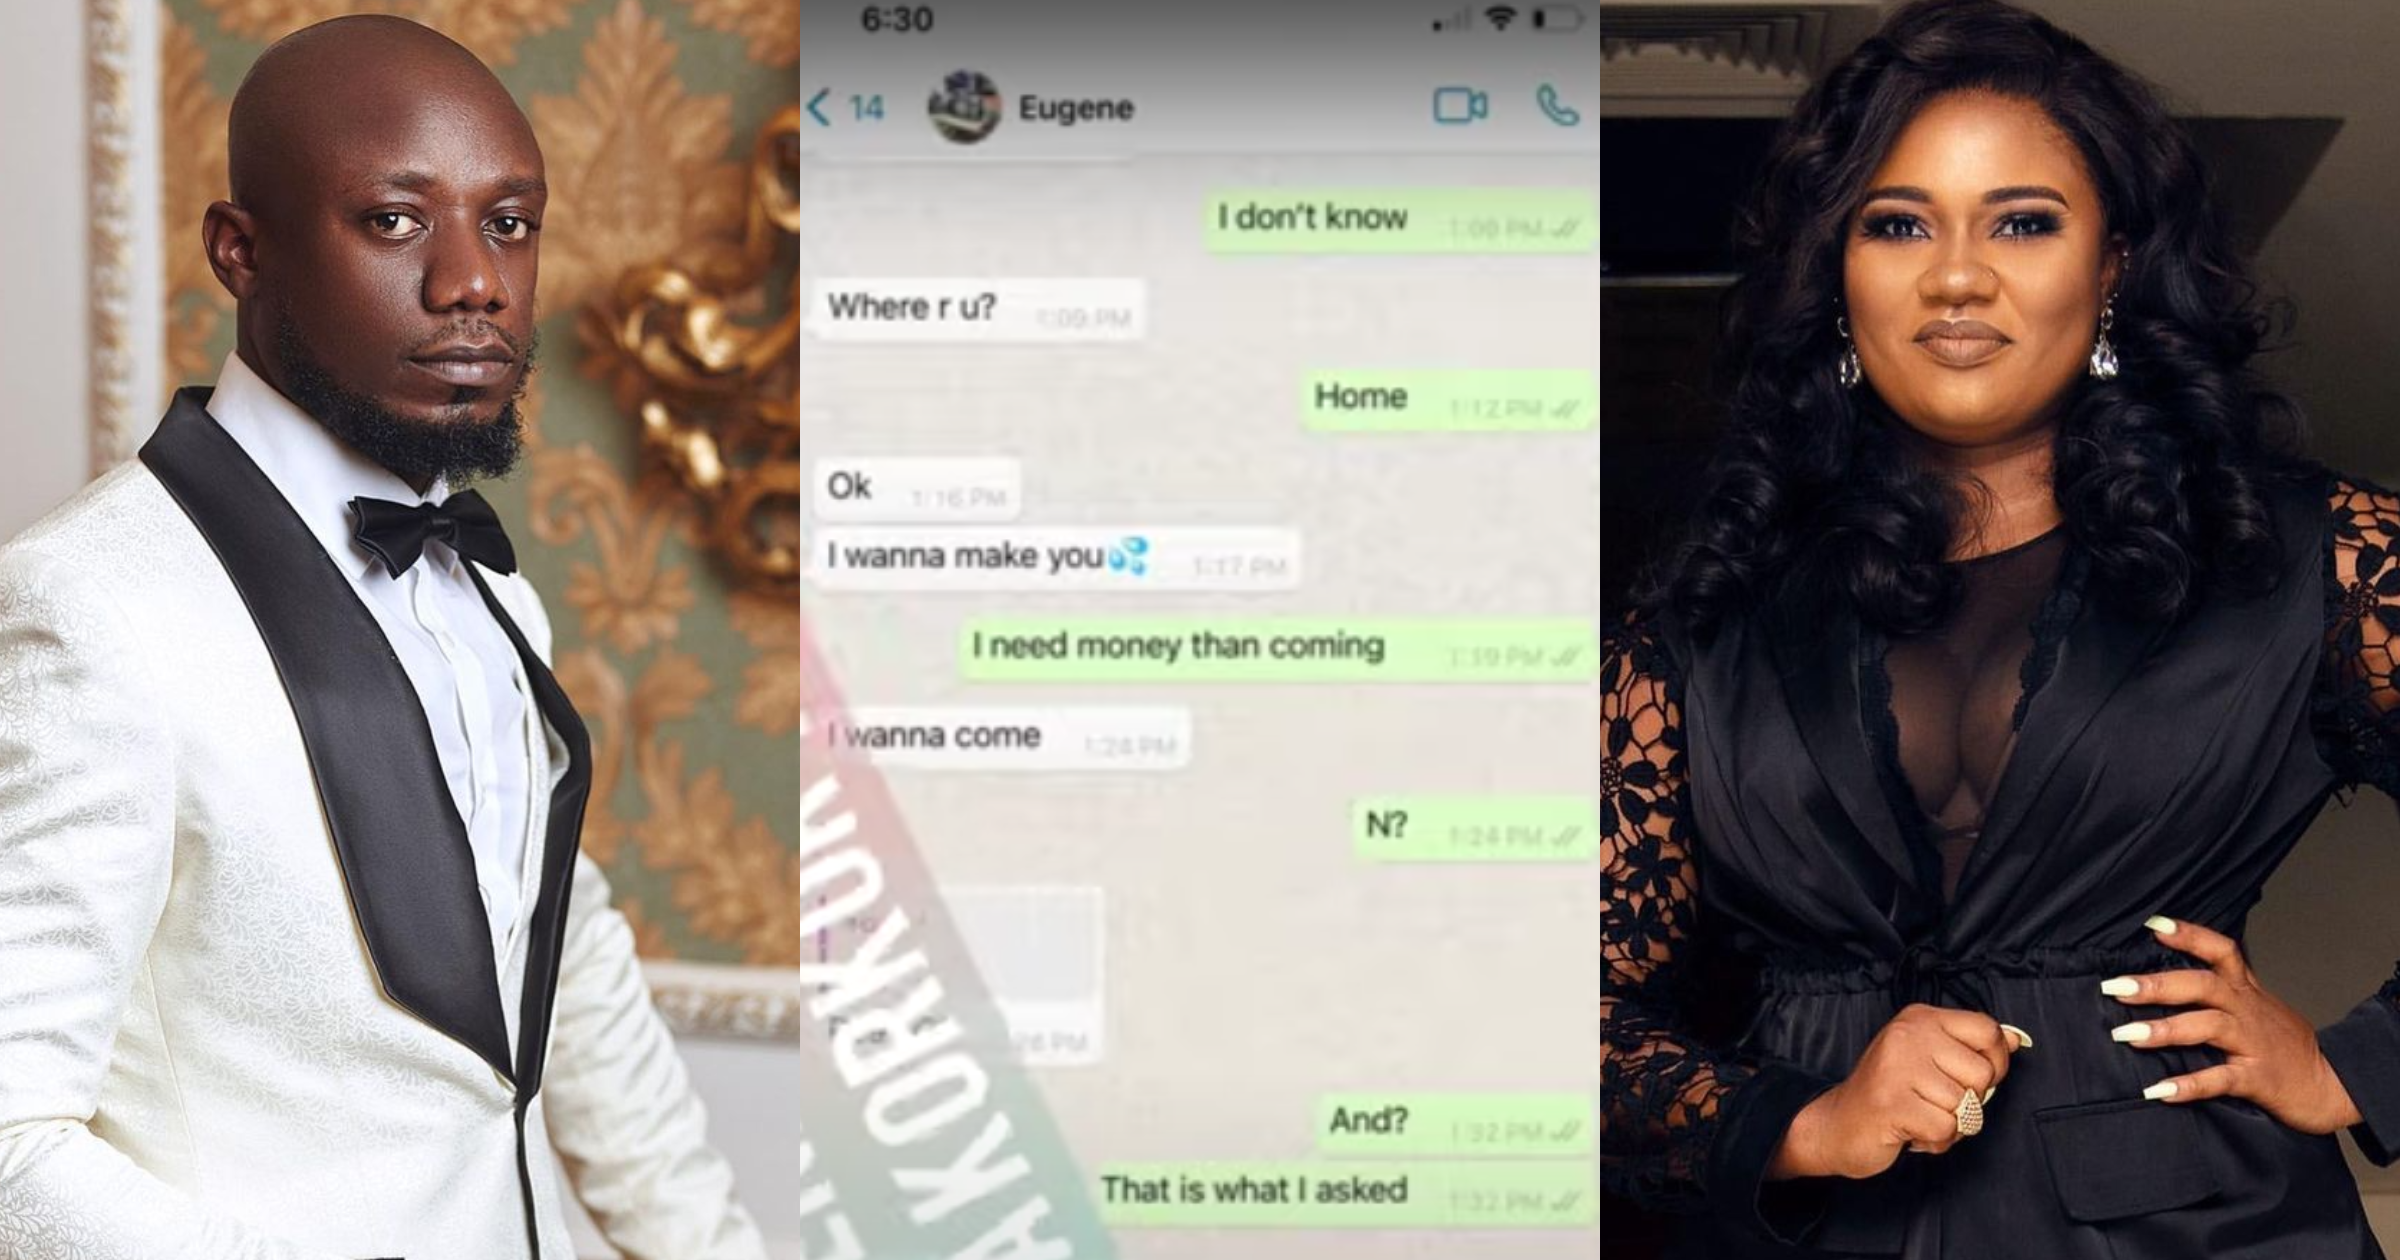 Abena Korkor Releases Whatsapp Chats With Nkonkonsa After He Tried To Deny Her Claims